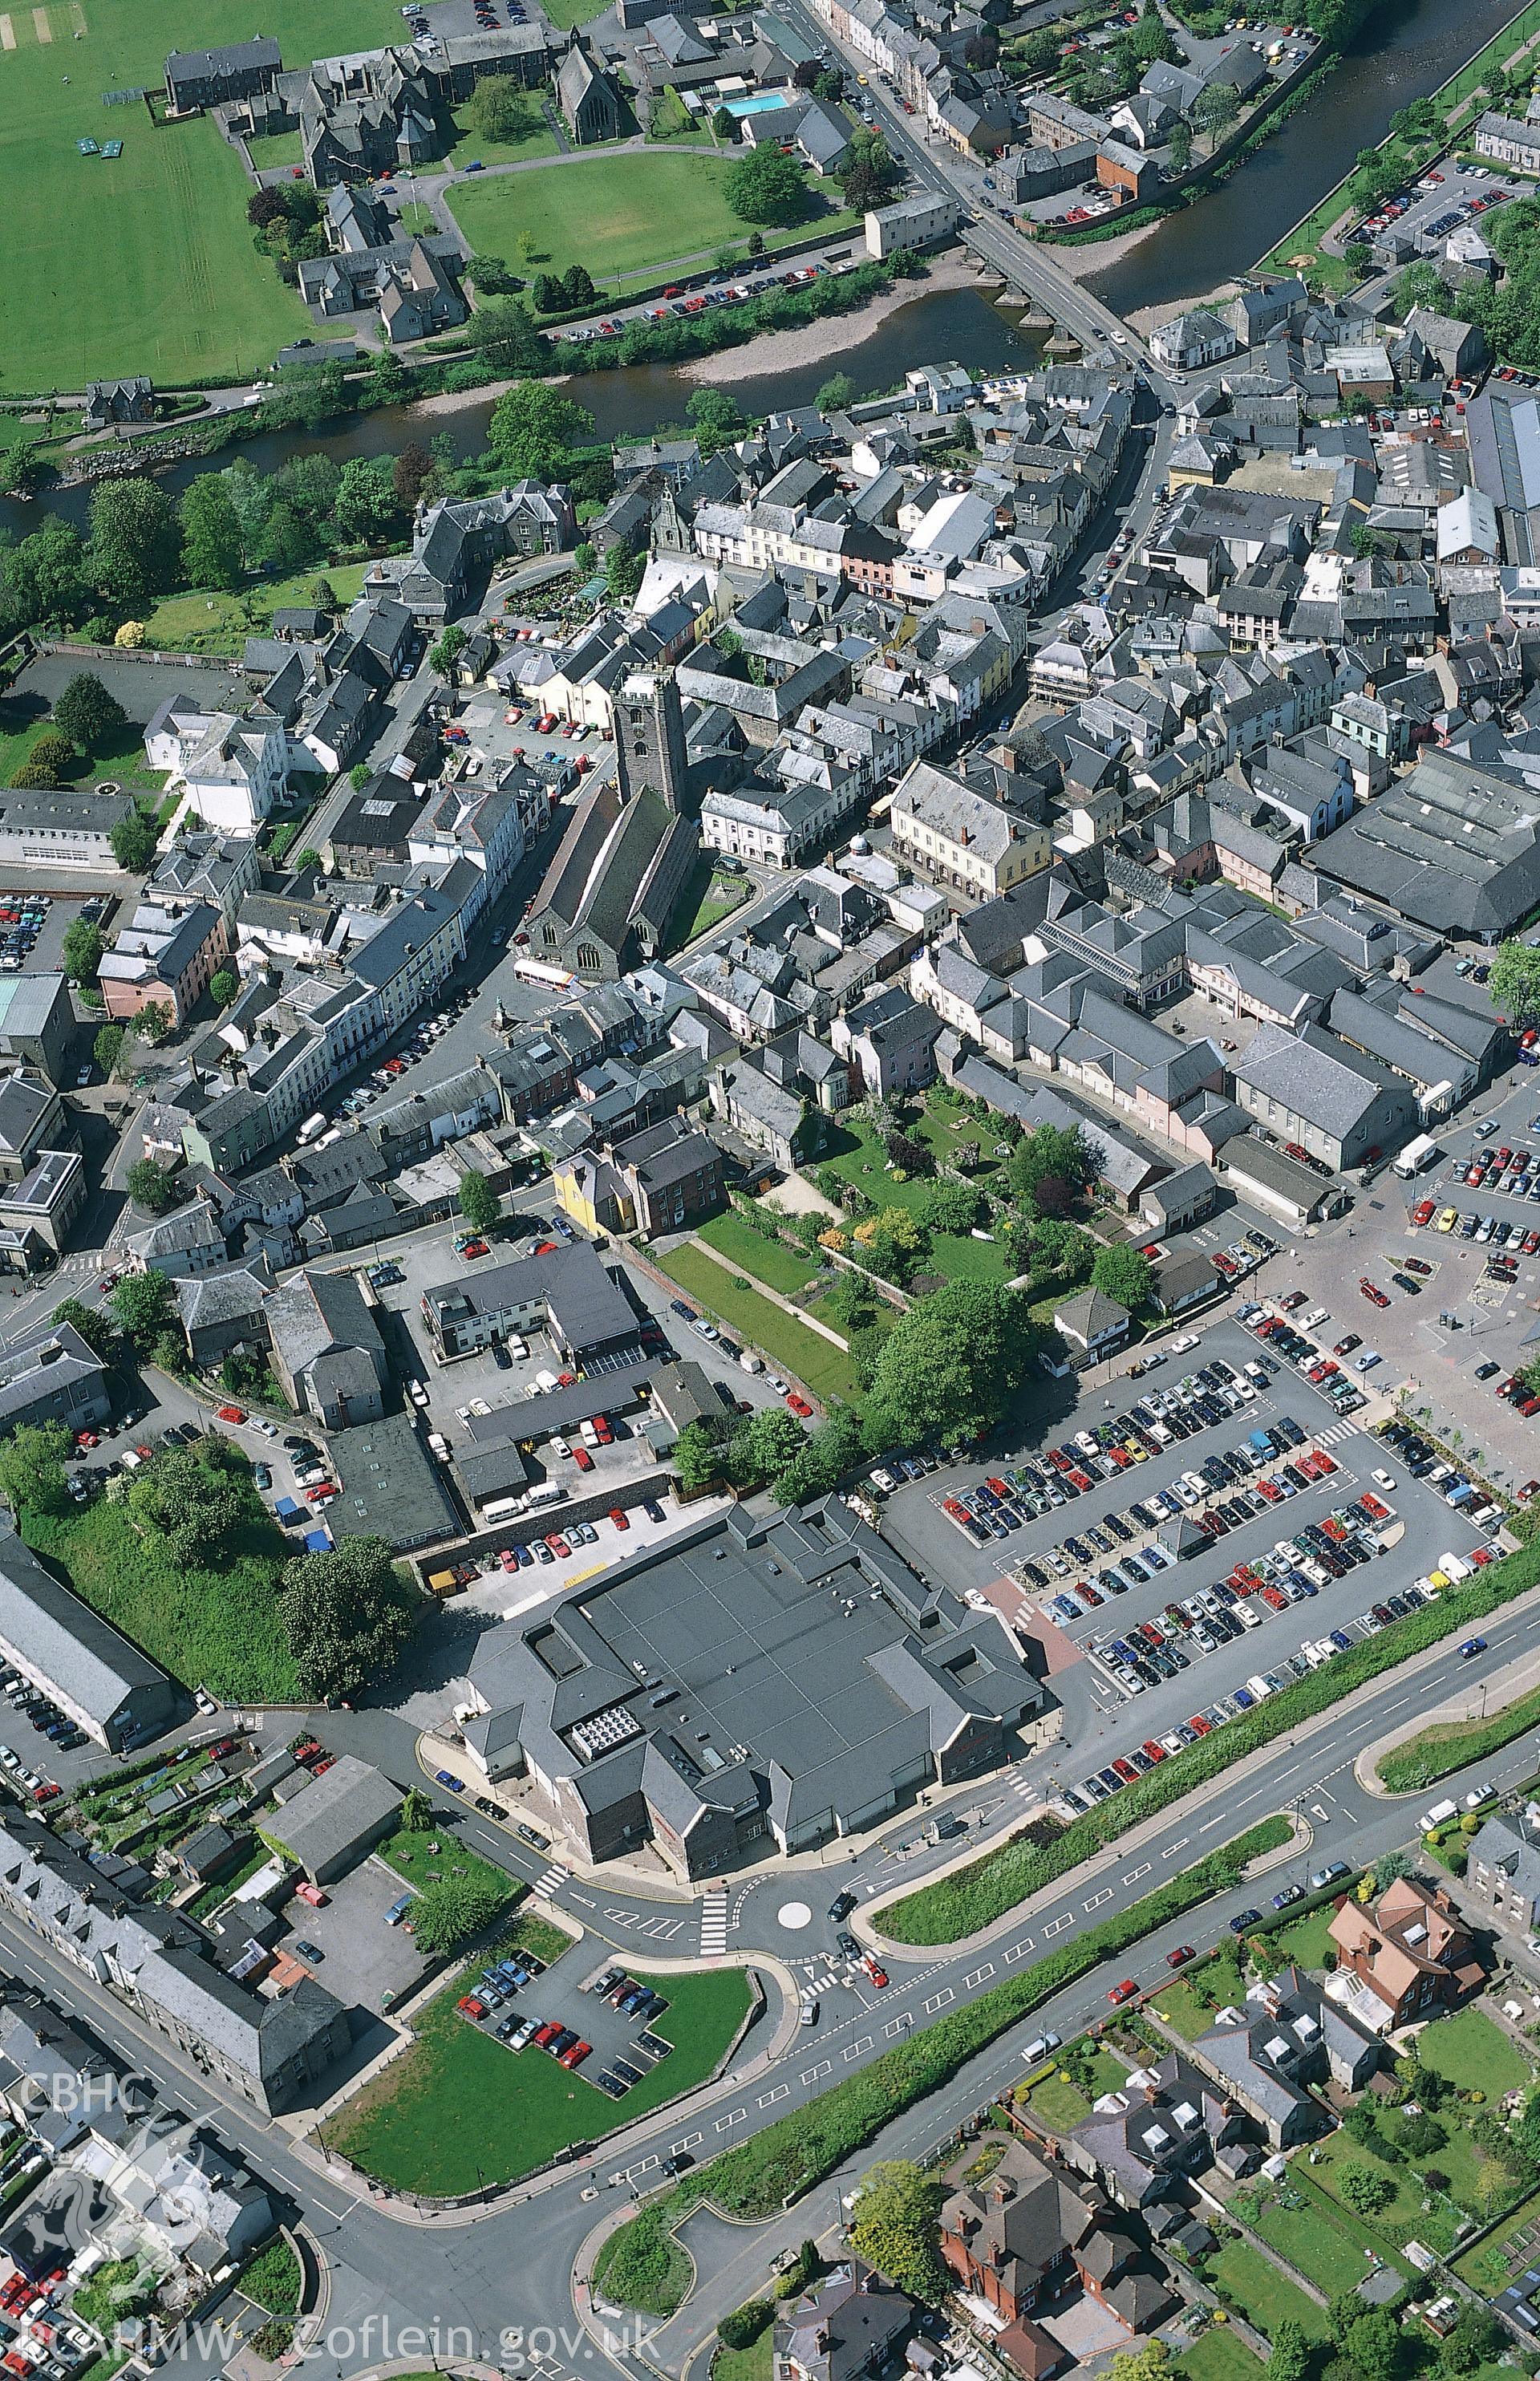 Slide of RCAHMW colour oblique aerial photograph of aerial view of Brecon Town, taken by Toby Driver, 2002.